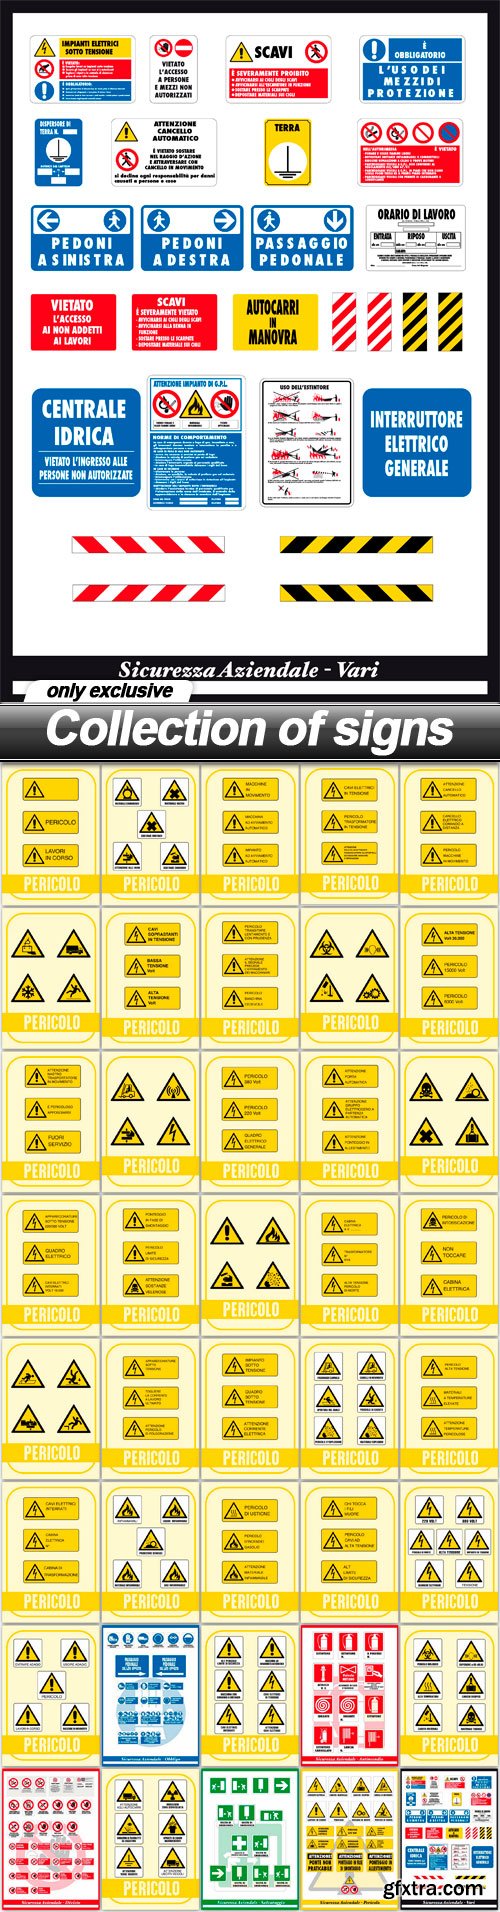 Collection of signs - 40 EPS